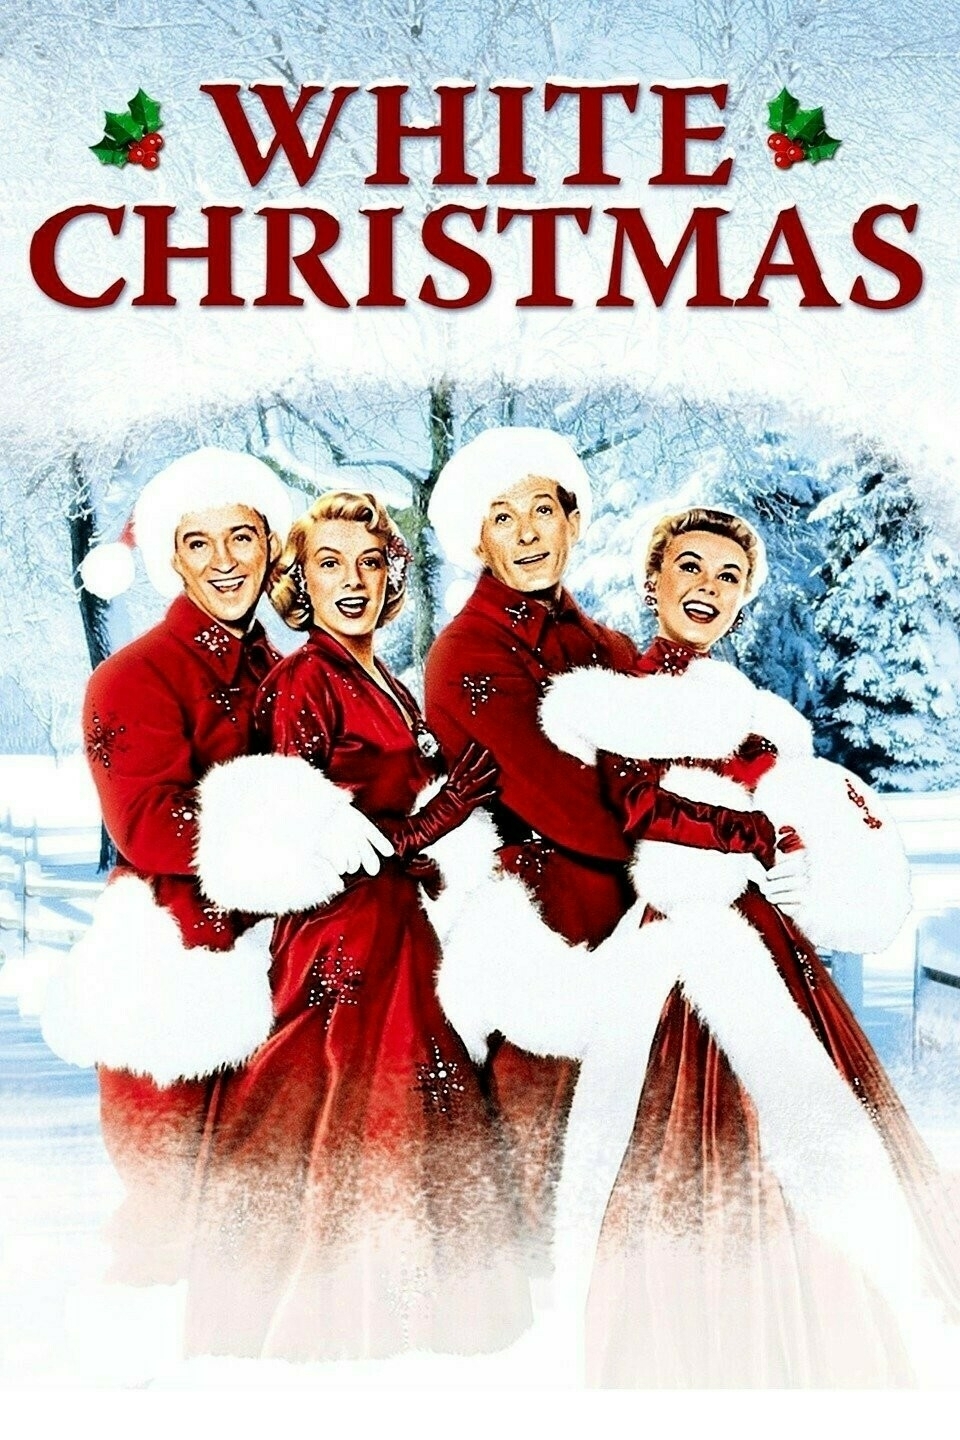 Movie poster for White Christmas (1954): Four people in festive red and white outfits pose against a snowy background with the words 'WHITE CHRISTMAS' above them.